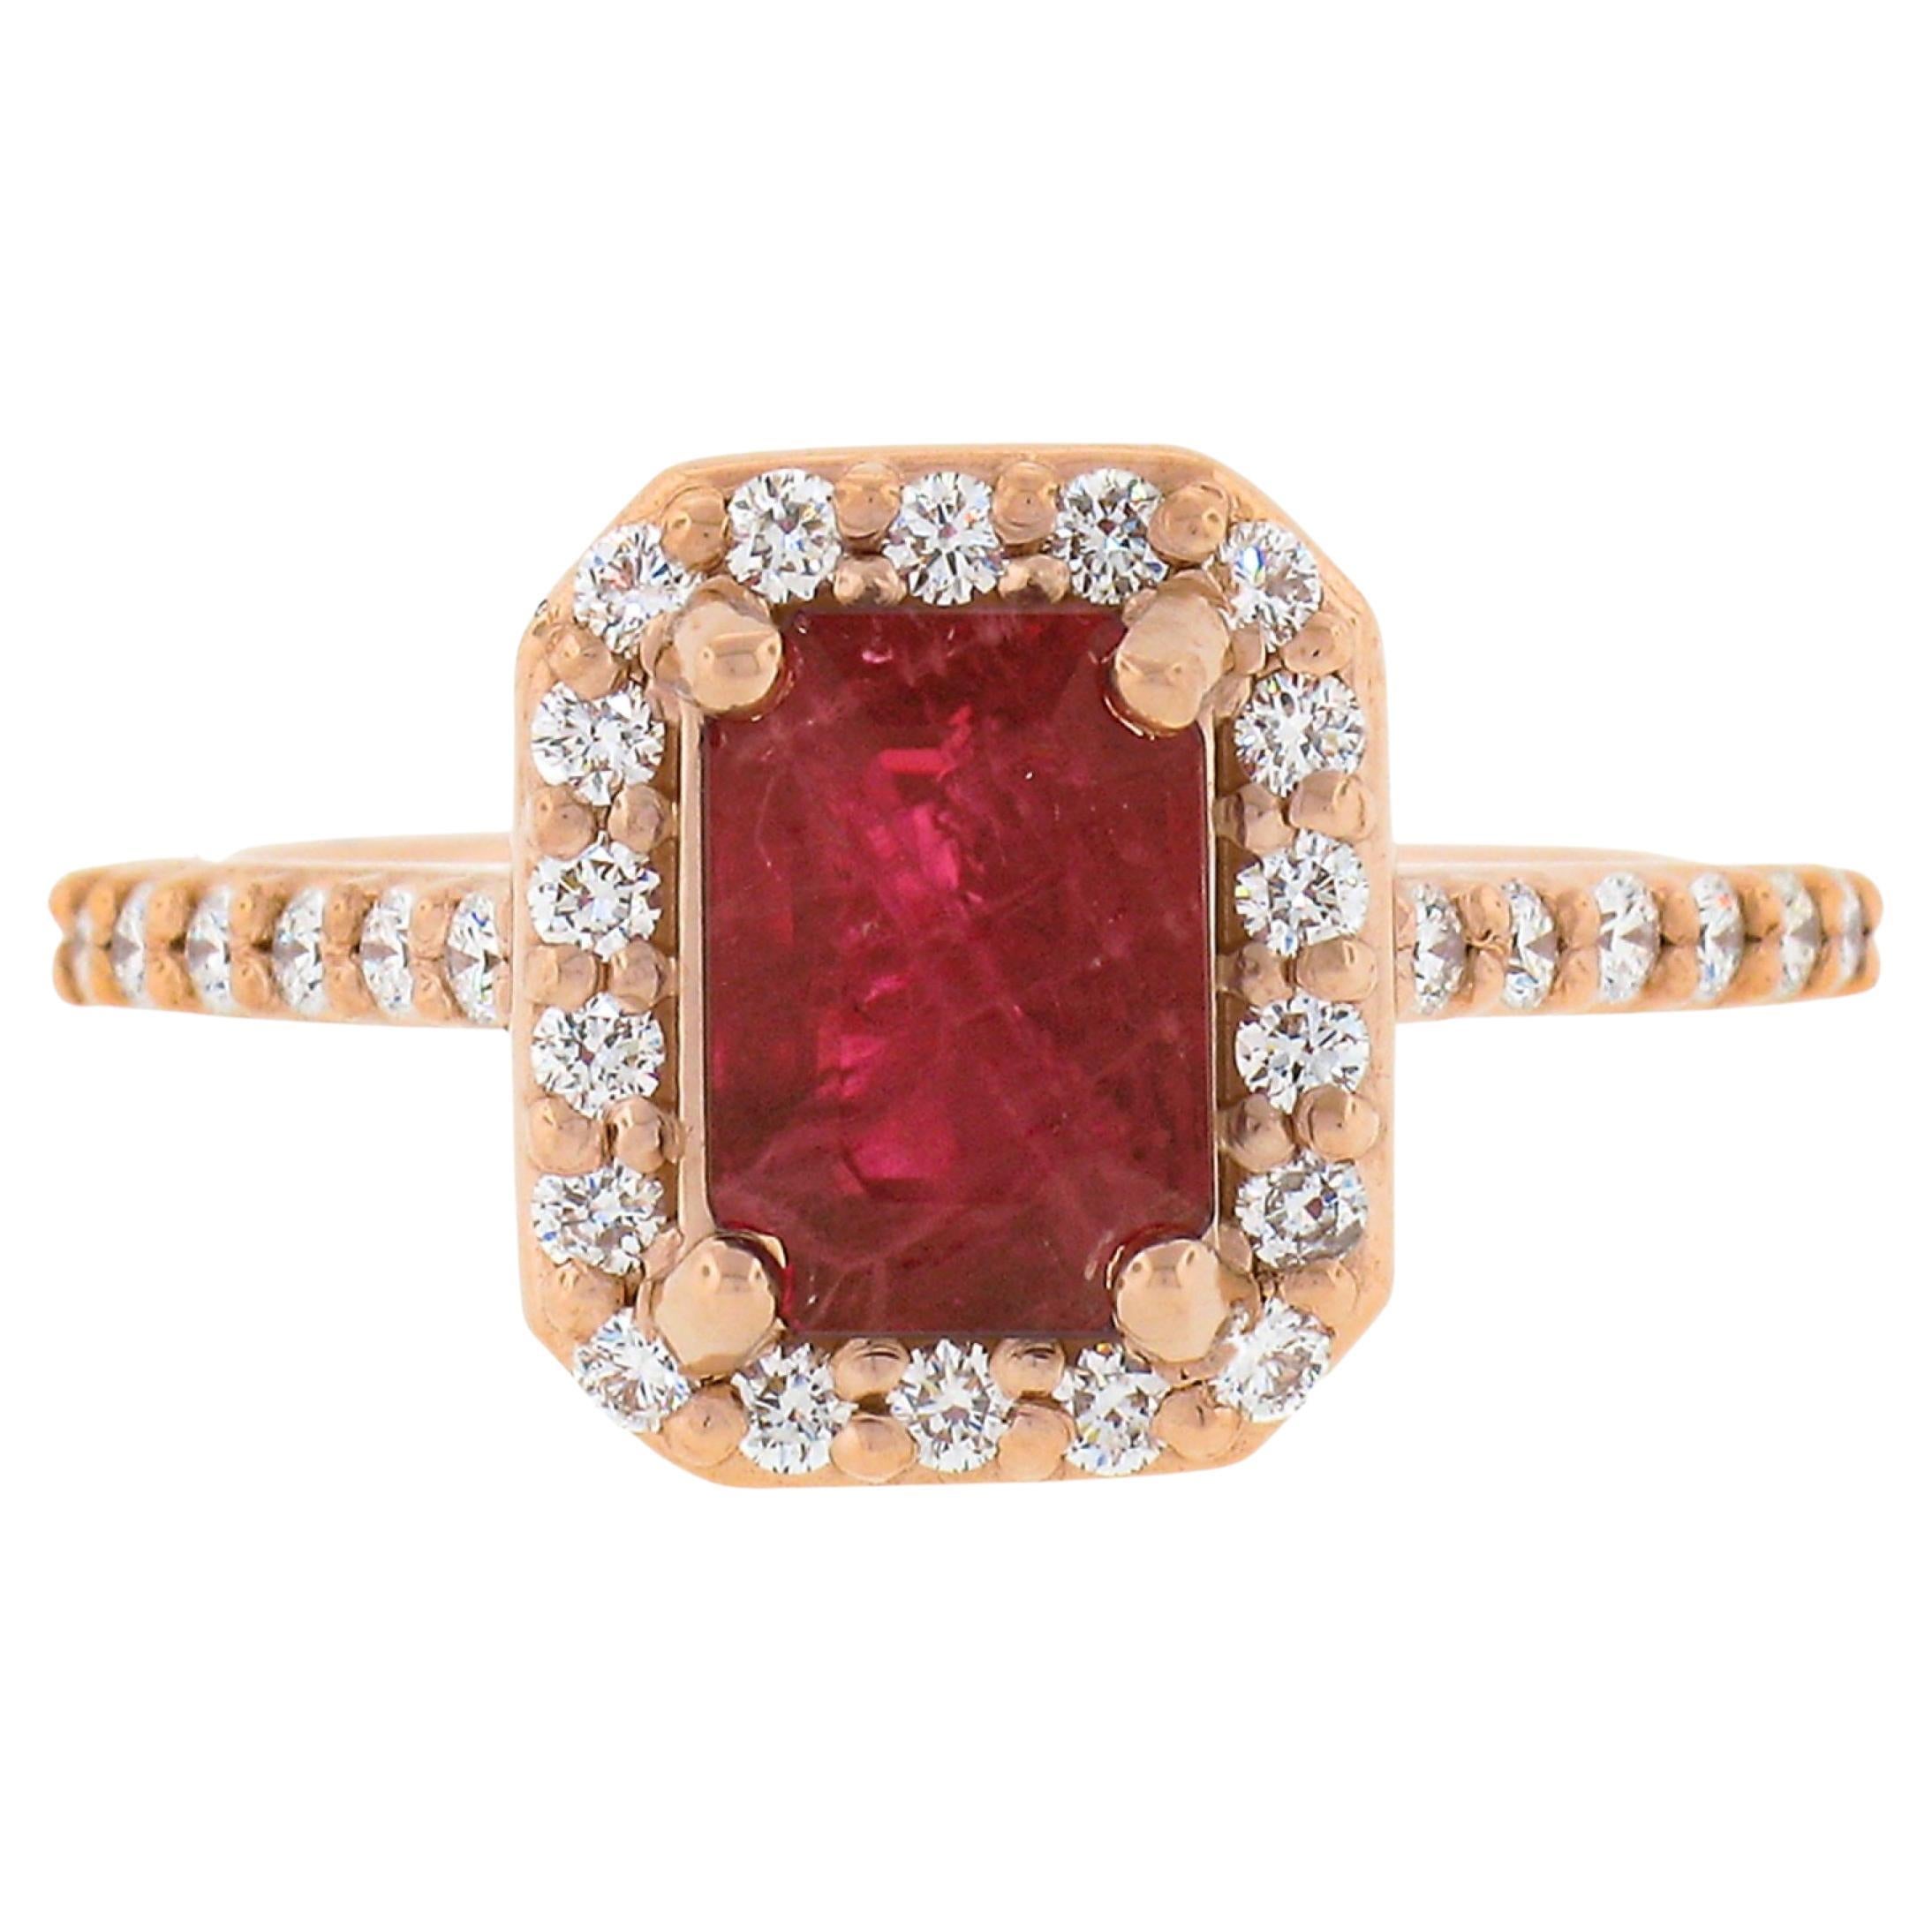 NEW 14k Rose Gold GIA Emerald Cut Ruby Solitaire w/ Diamond Halo Engagement Ring For Sale